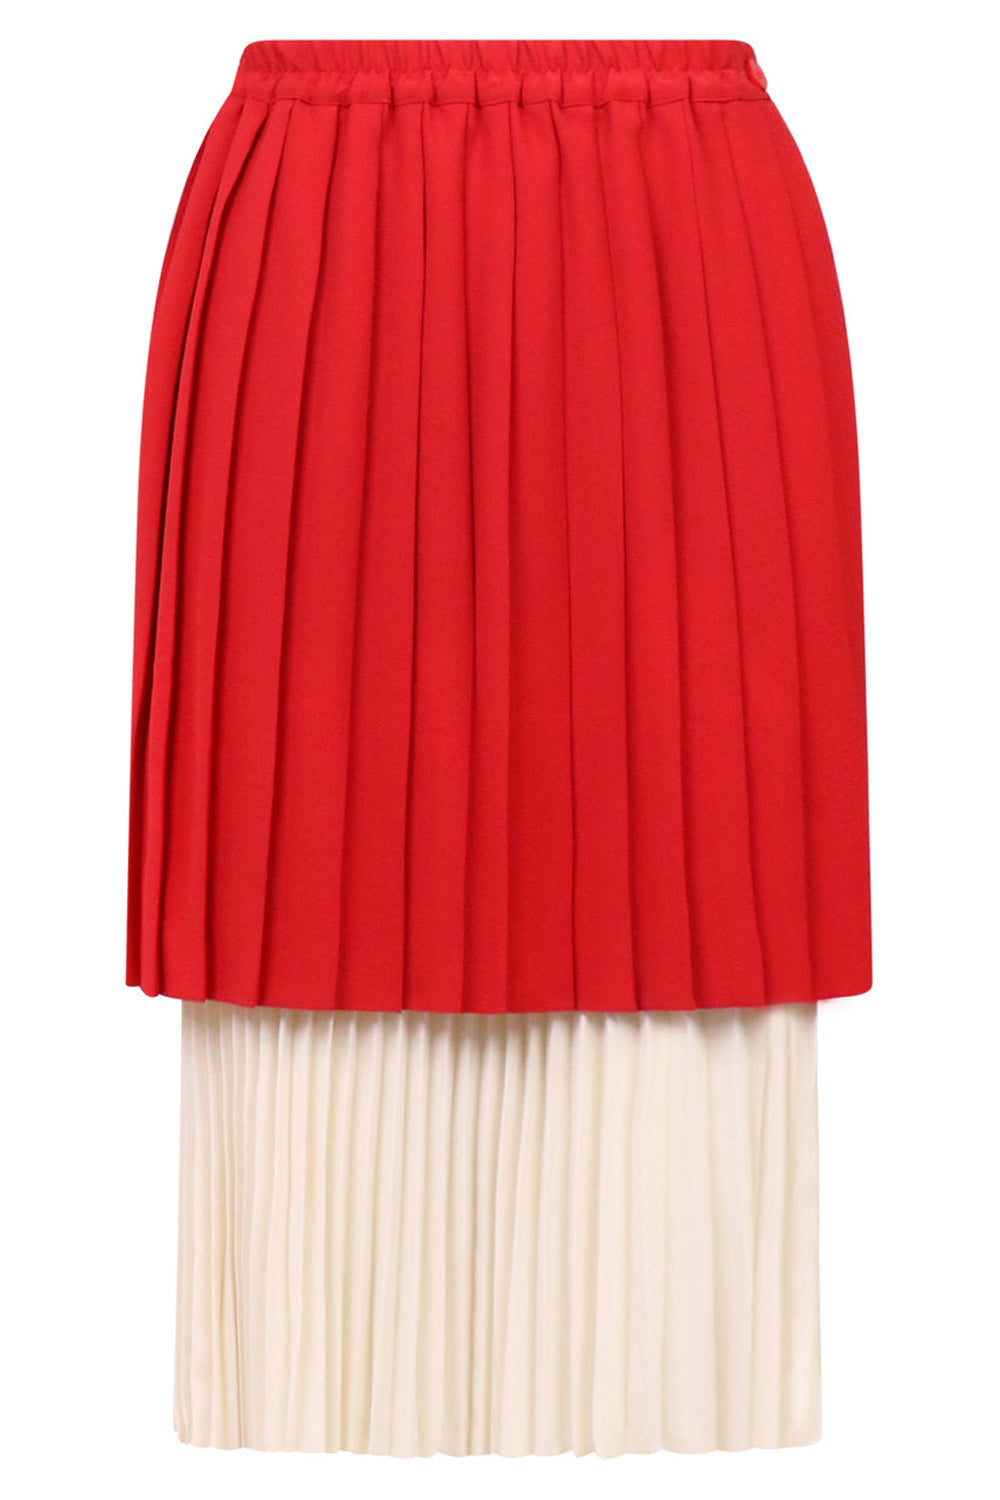 Pearls Bliss Airy Pleated Midi Skirt in Red - Retro, Indie and Unique  Fashion